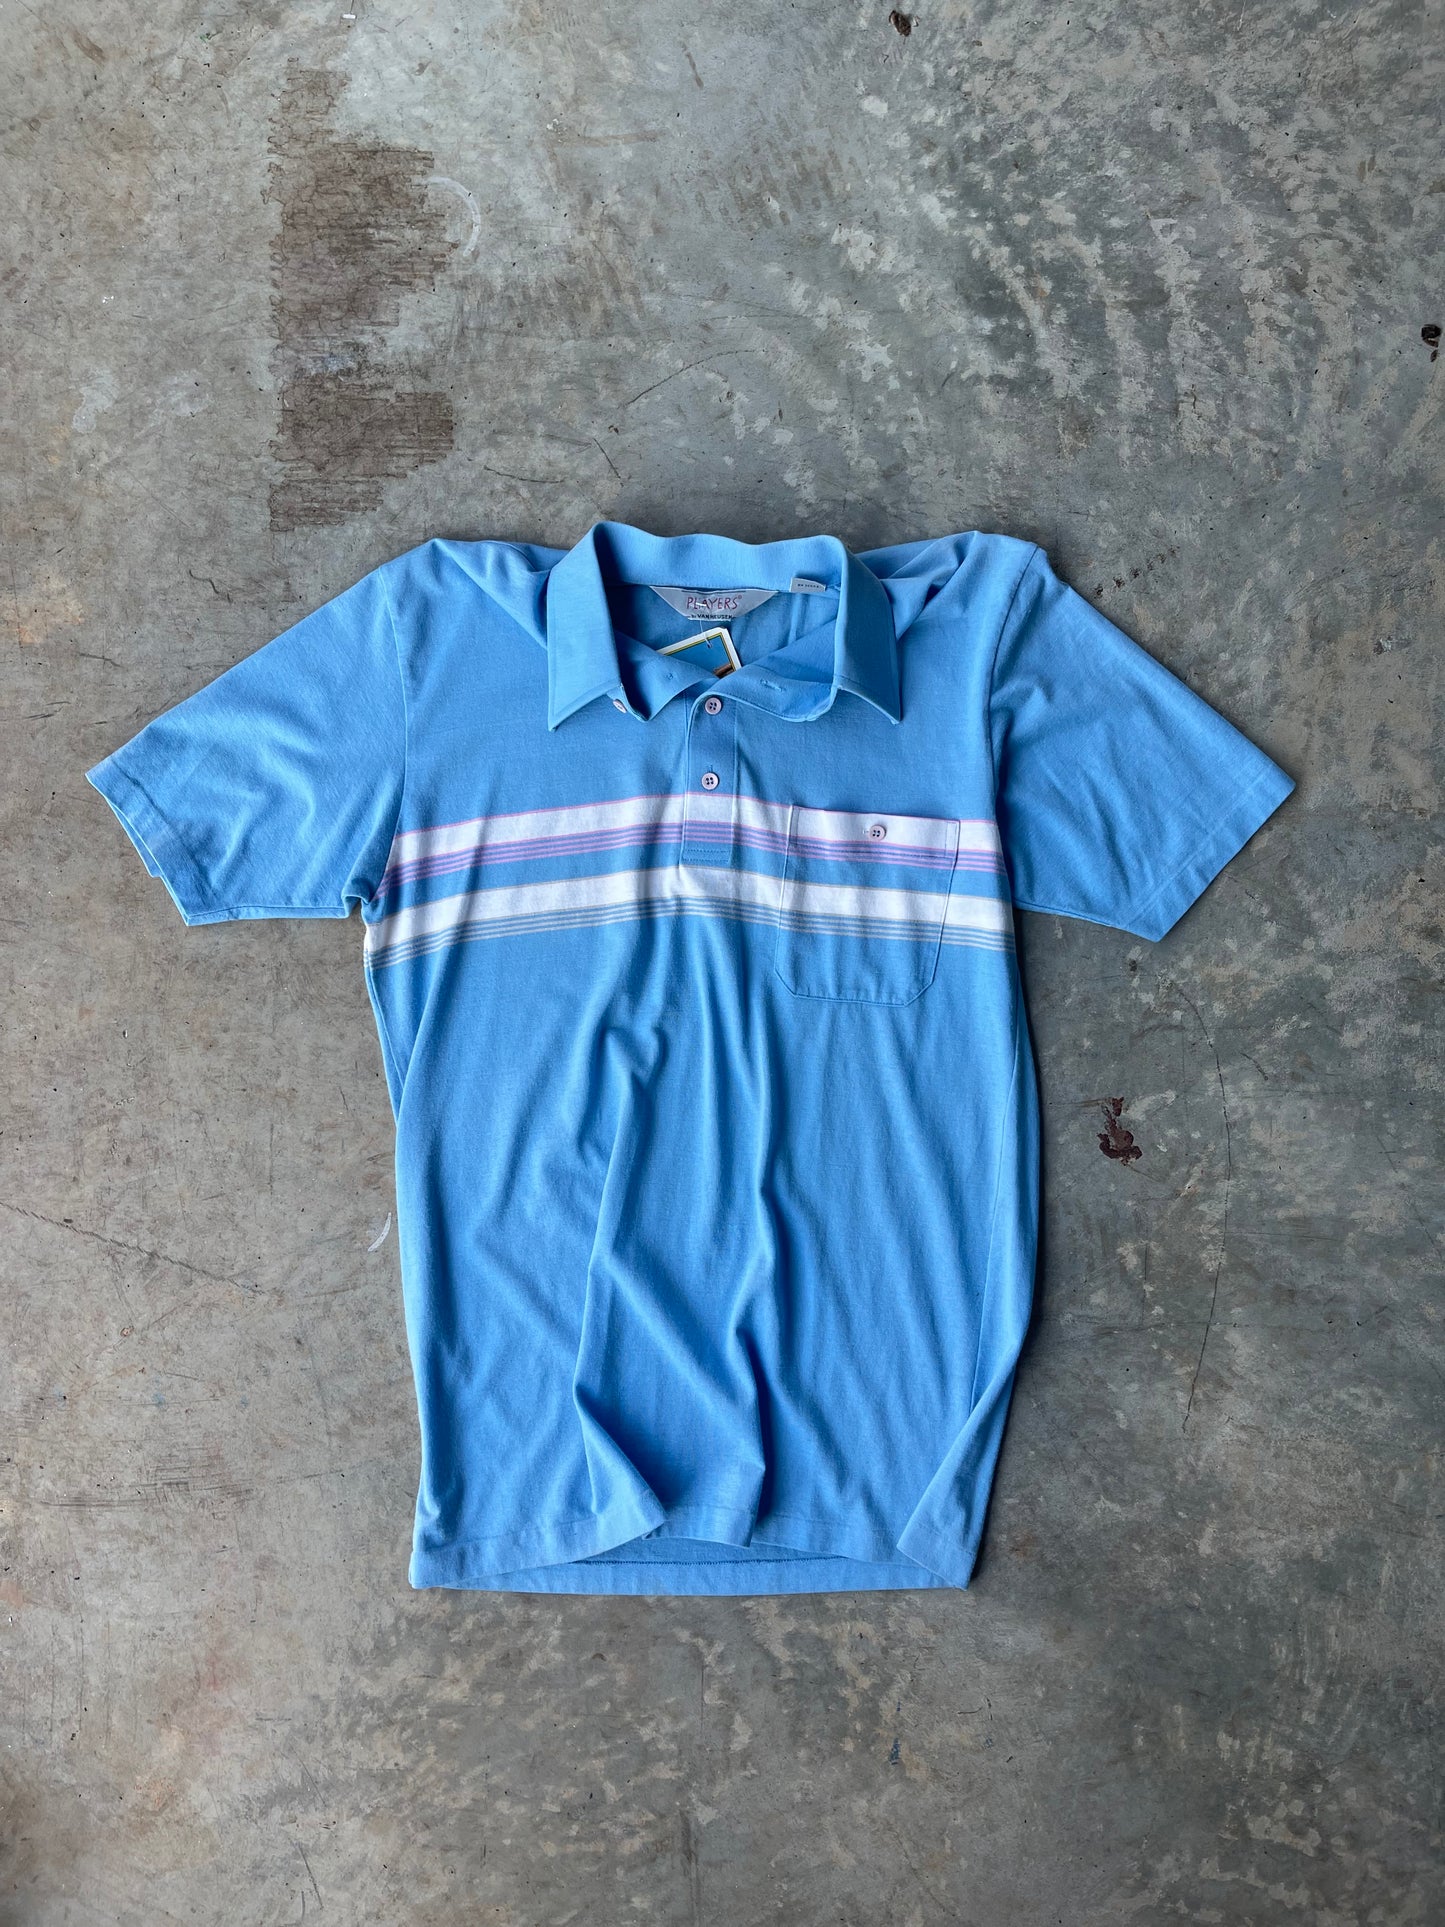 Blue Striped Collared Shirt